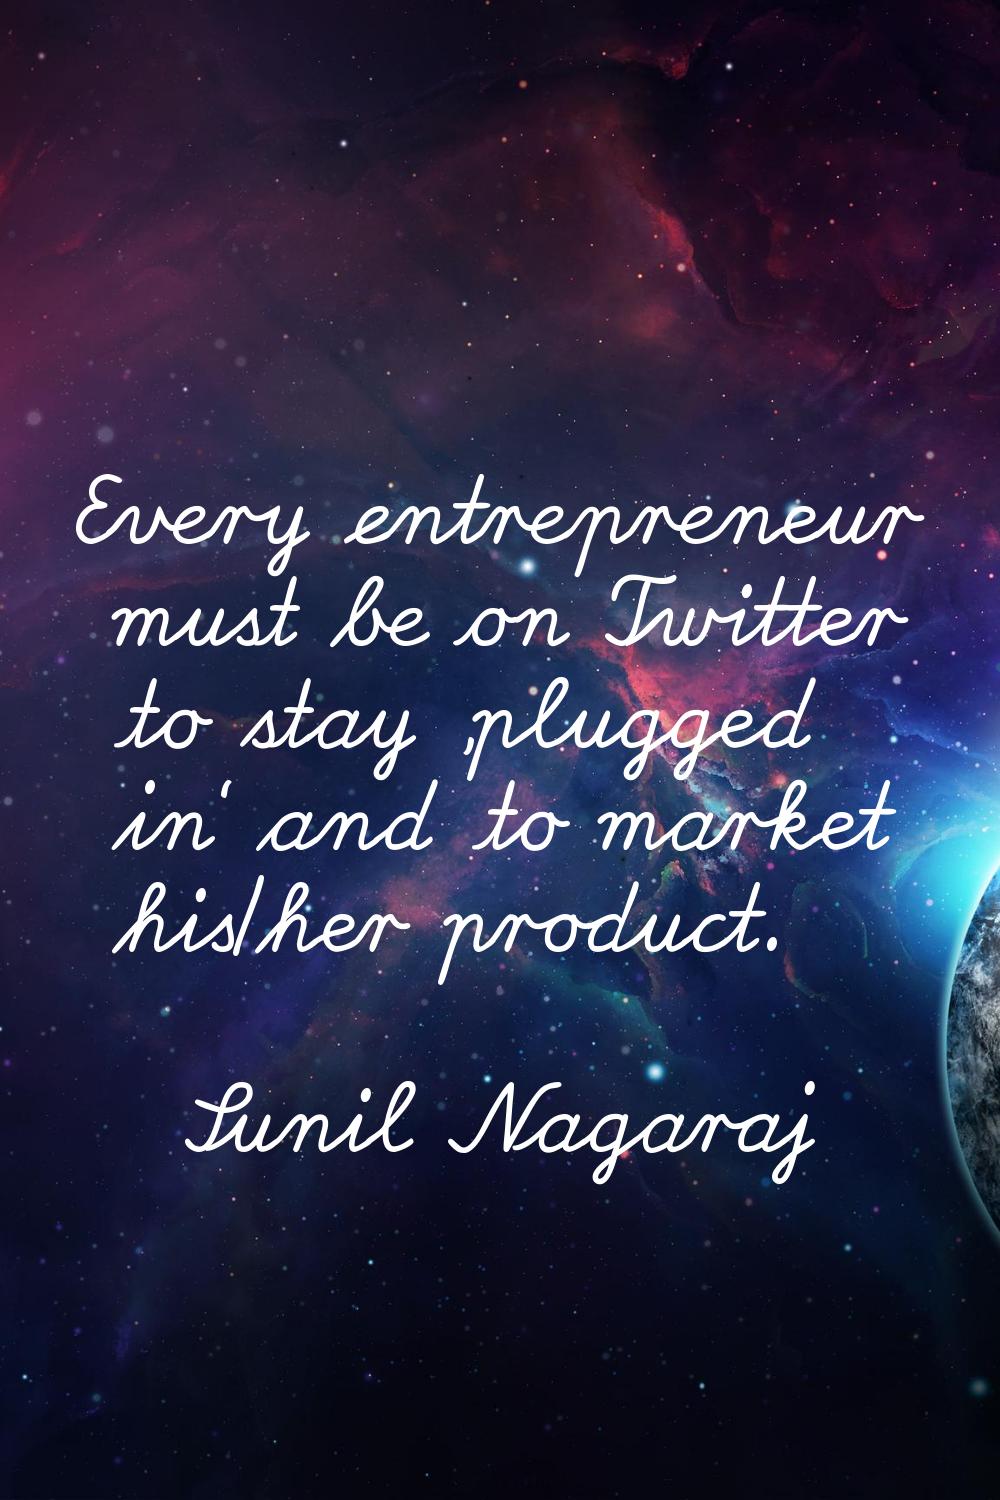 Every entrepreneur must be on Twitter to stay 'plugged in' and to market his/her product.